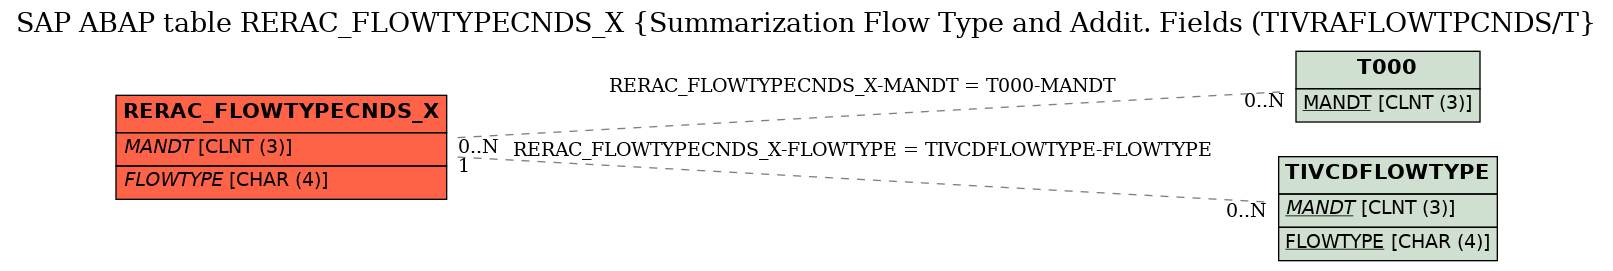 E-R Diagram for table RERAC_FLOWTYPECNDS_X (Summarization Flow Type and Addit. Fields (TIVRAFLOWTPCNDS/T)